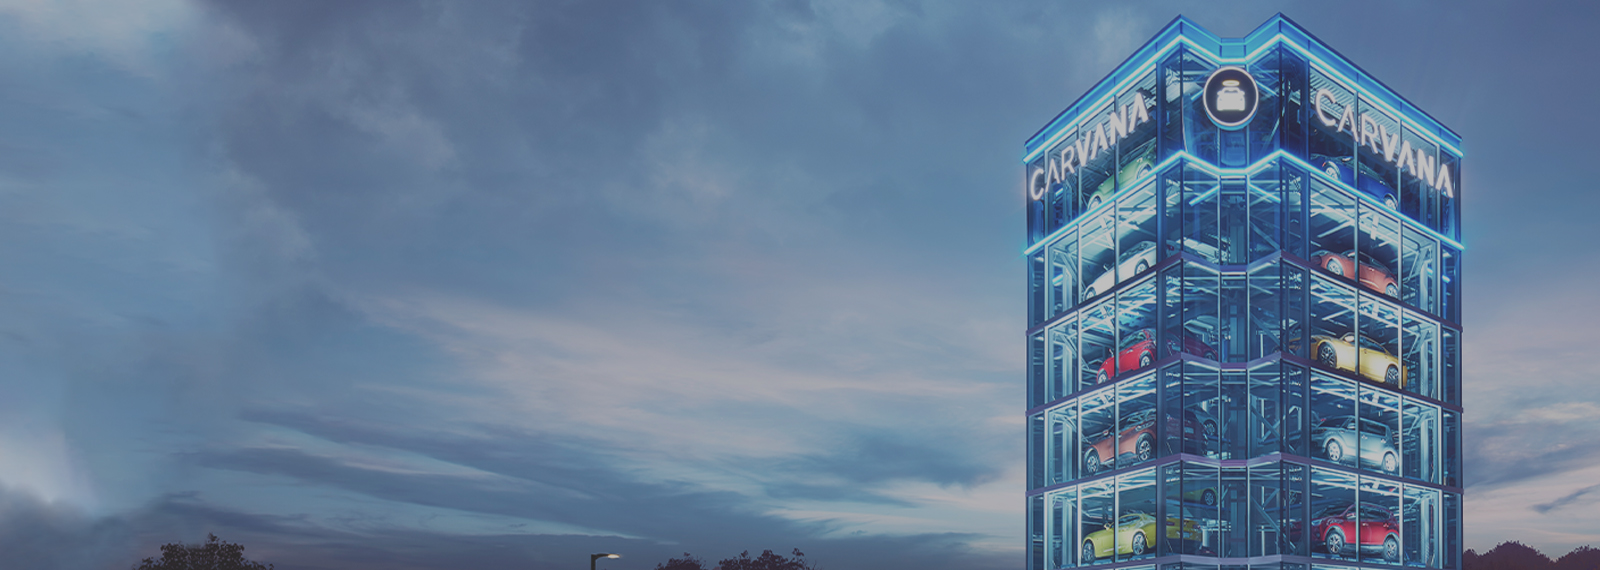 Carvana Page Banner